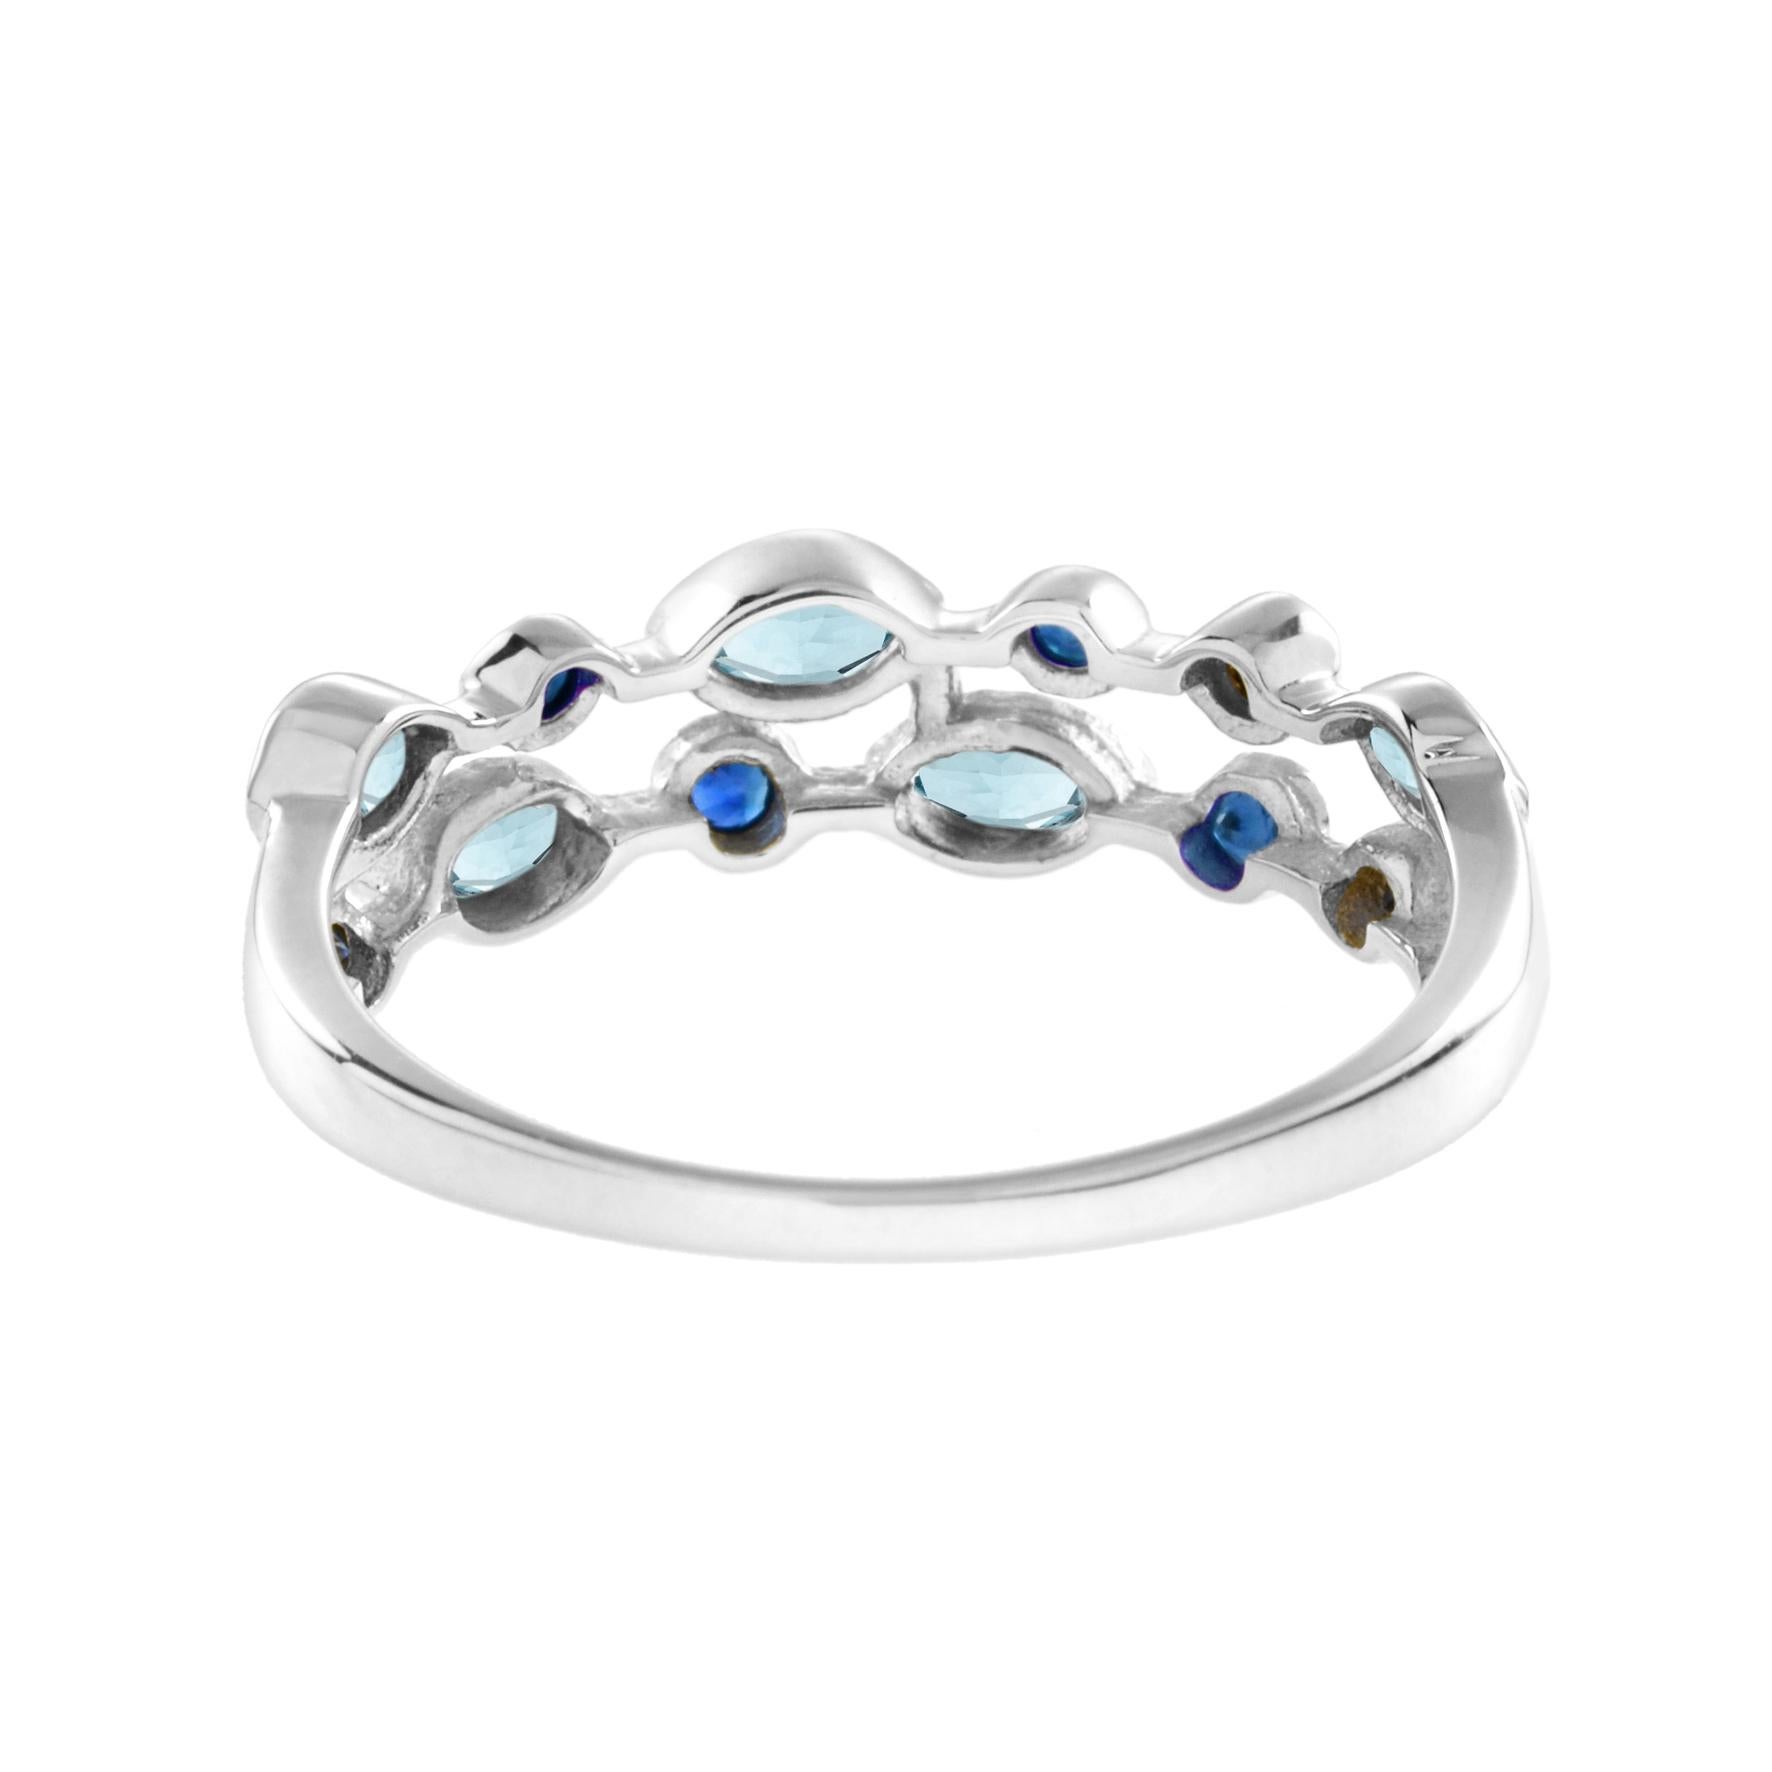 For Sale:  Double Row Aquamarine and Sapphire Eternity Ring in 14K White Gold 4